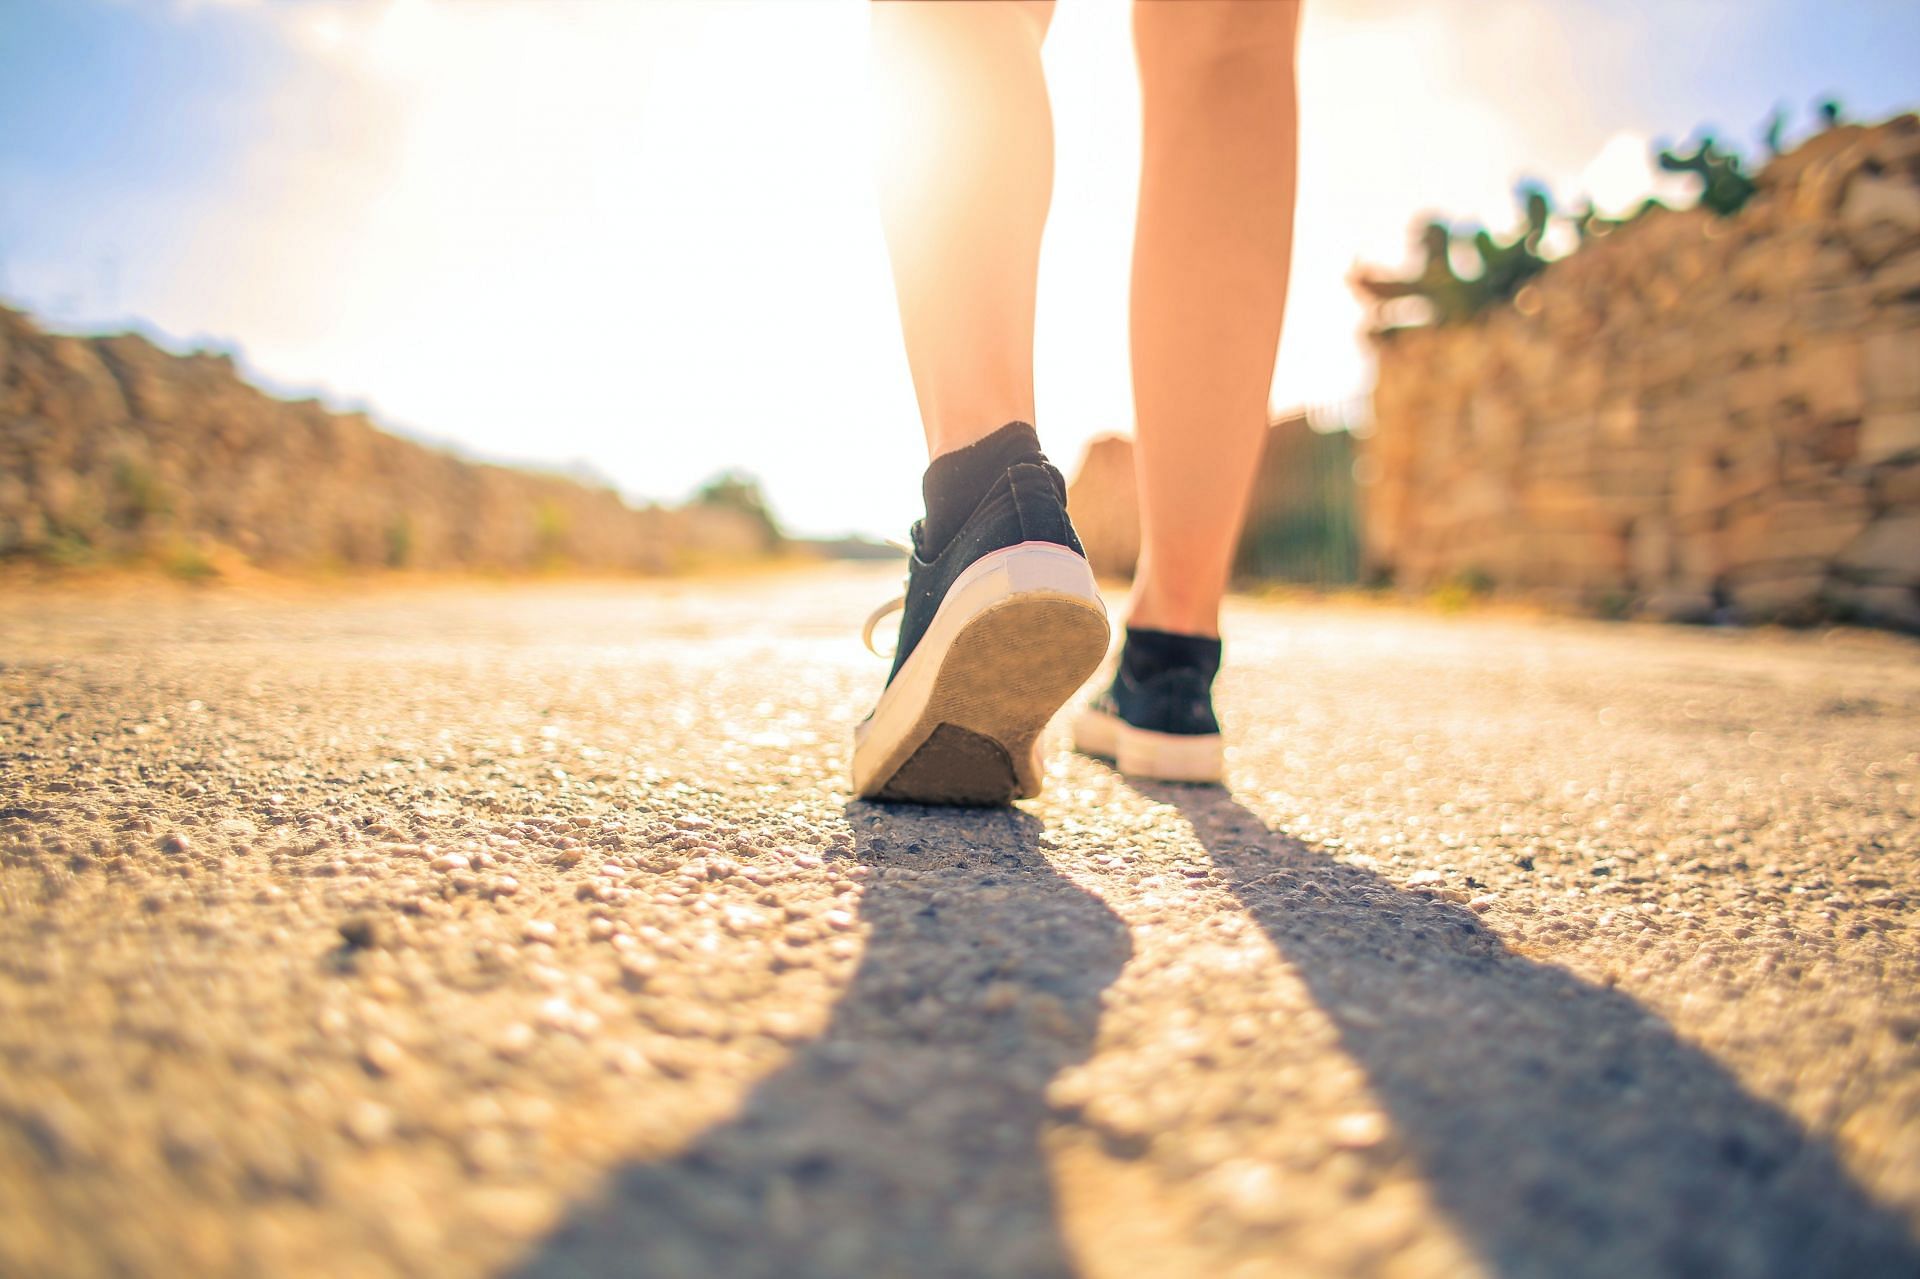 Interval walking is a great way to add intensity to your exercises and burn calories! (Image via pexels/Andrea Piacquadio)